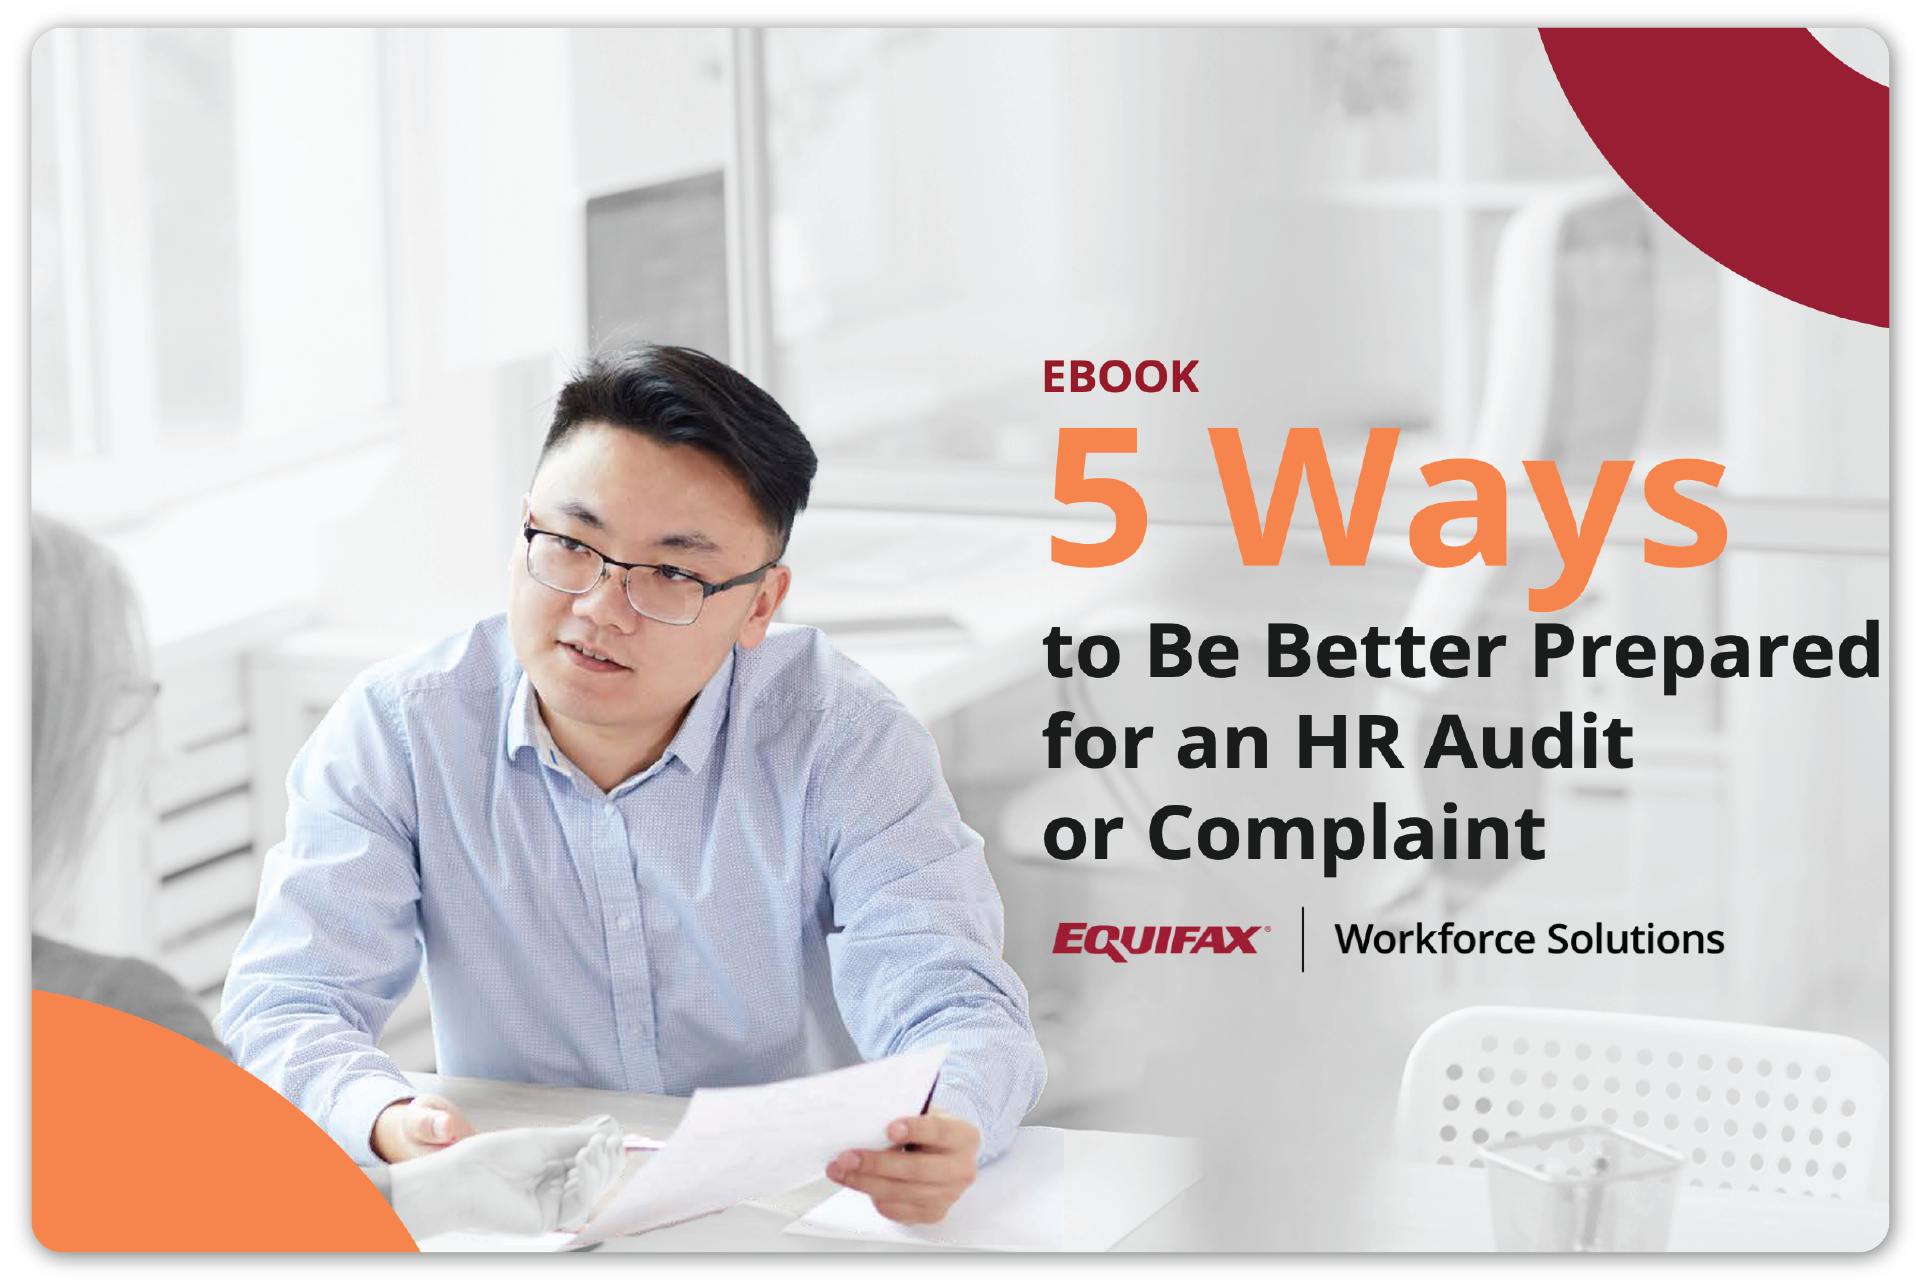 5 Ways to Better Prepare for an HR Audit or Complaint Image